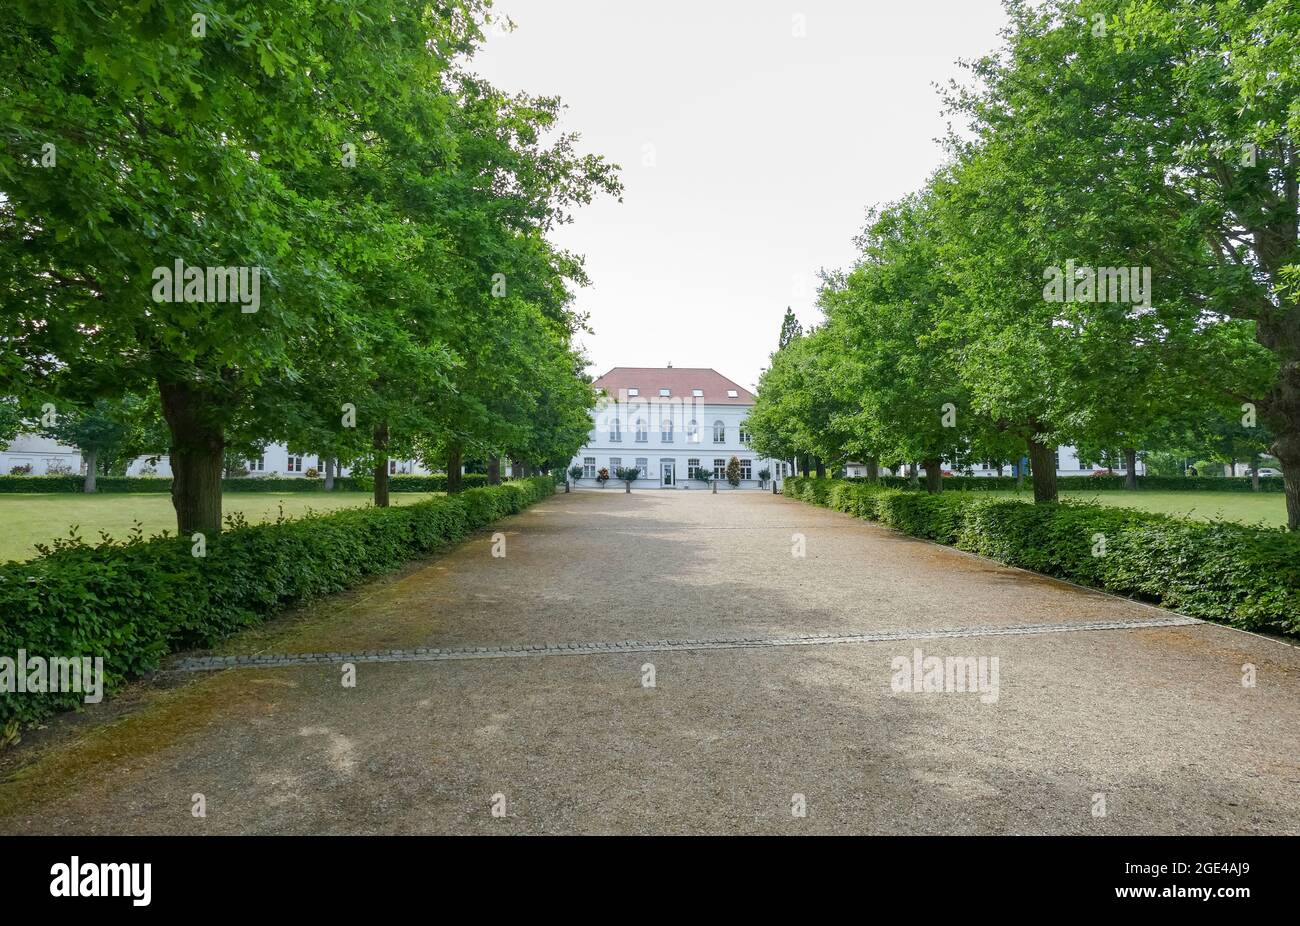 Scenery around the Putbus Circus, a classicist building area at Ruegen island in Germany Stock Photo